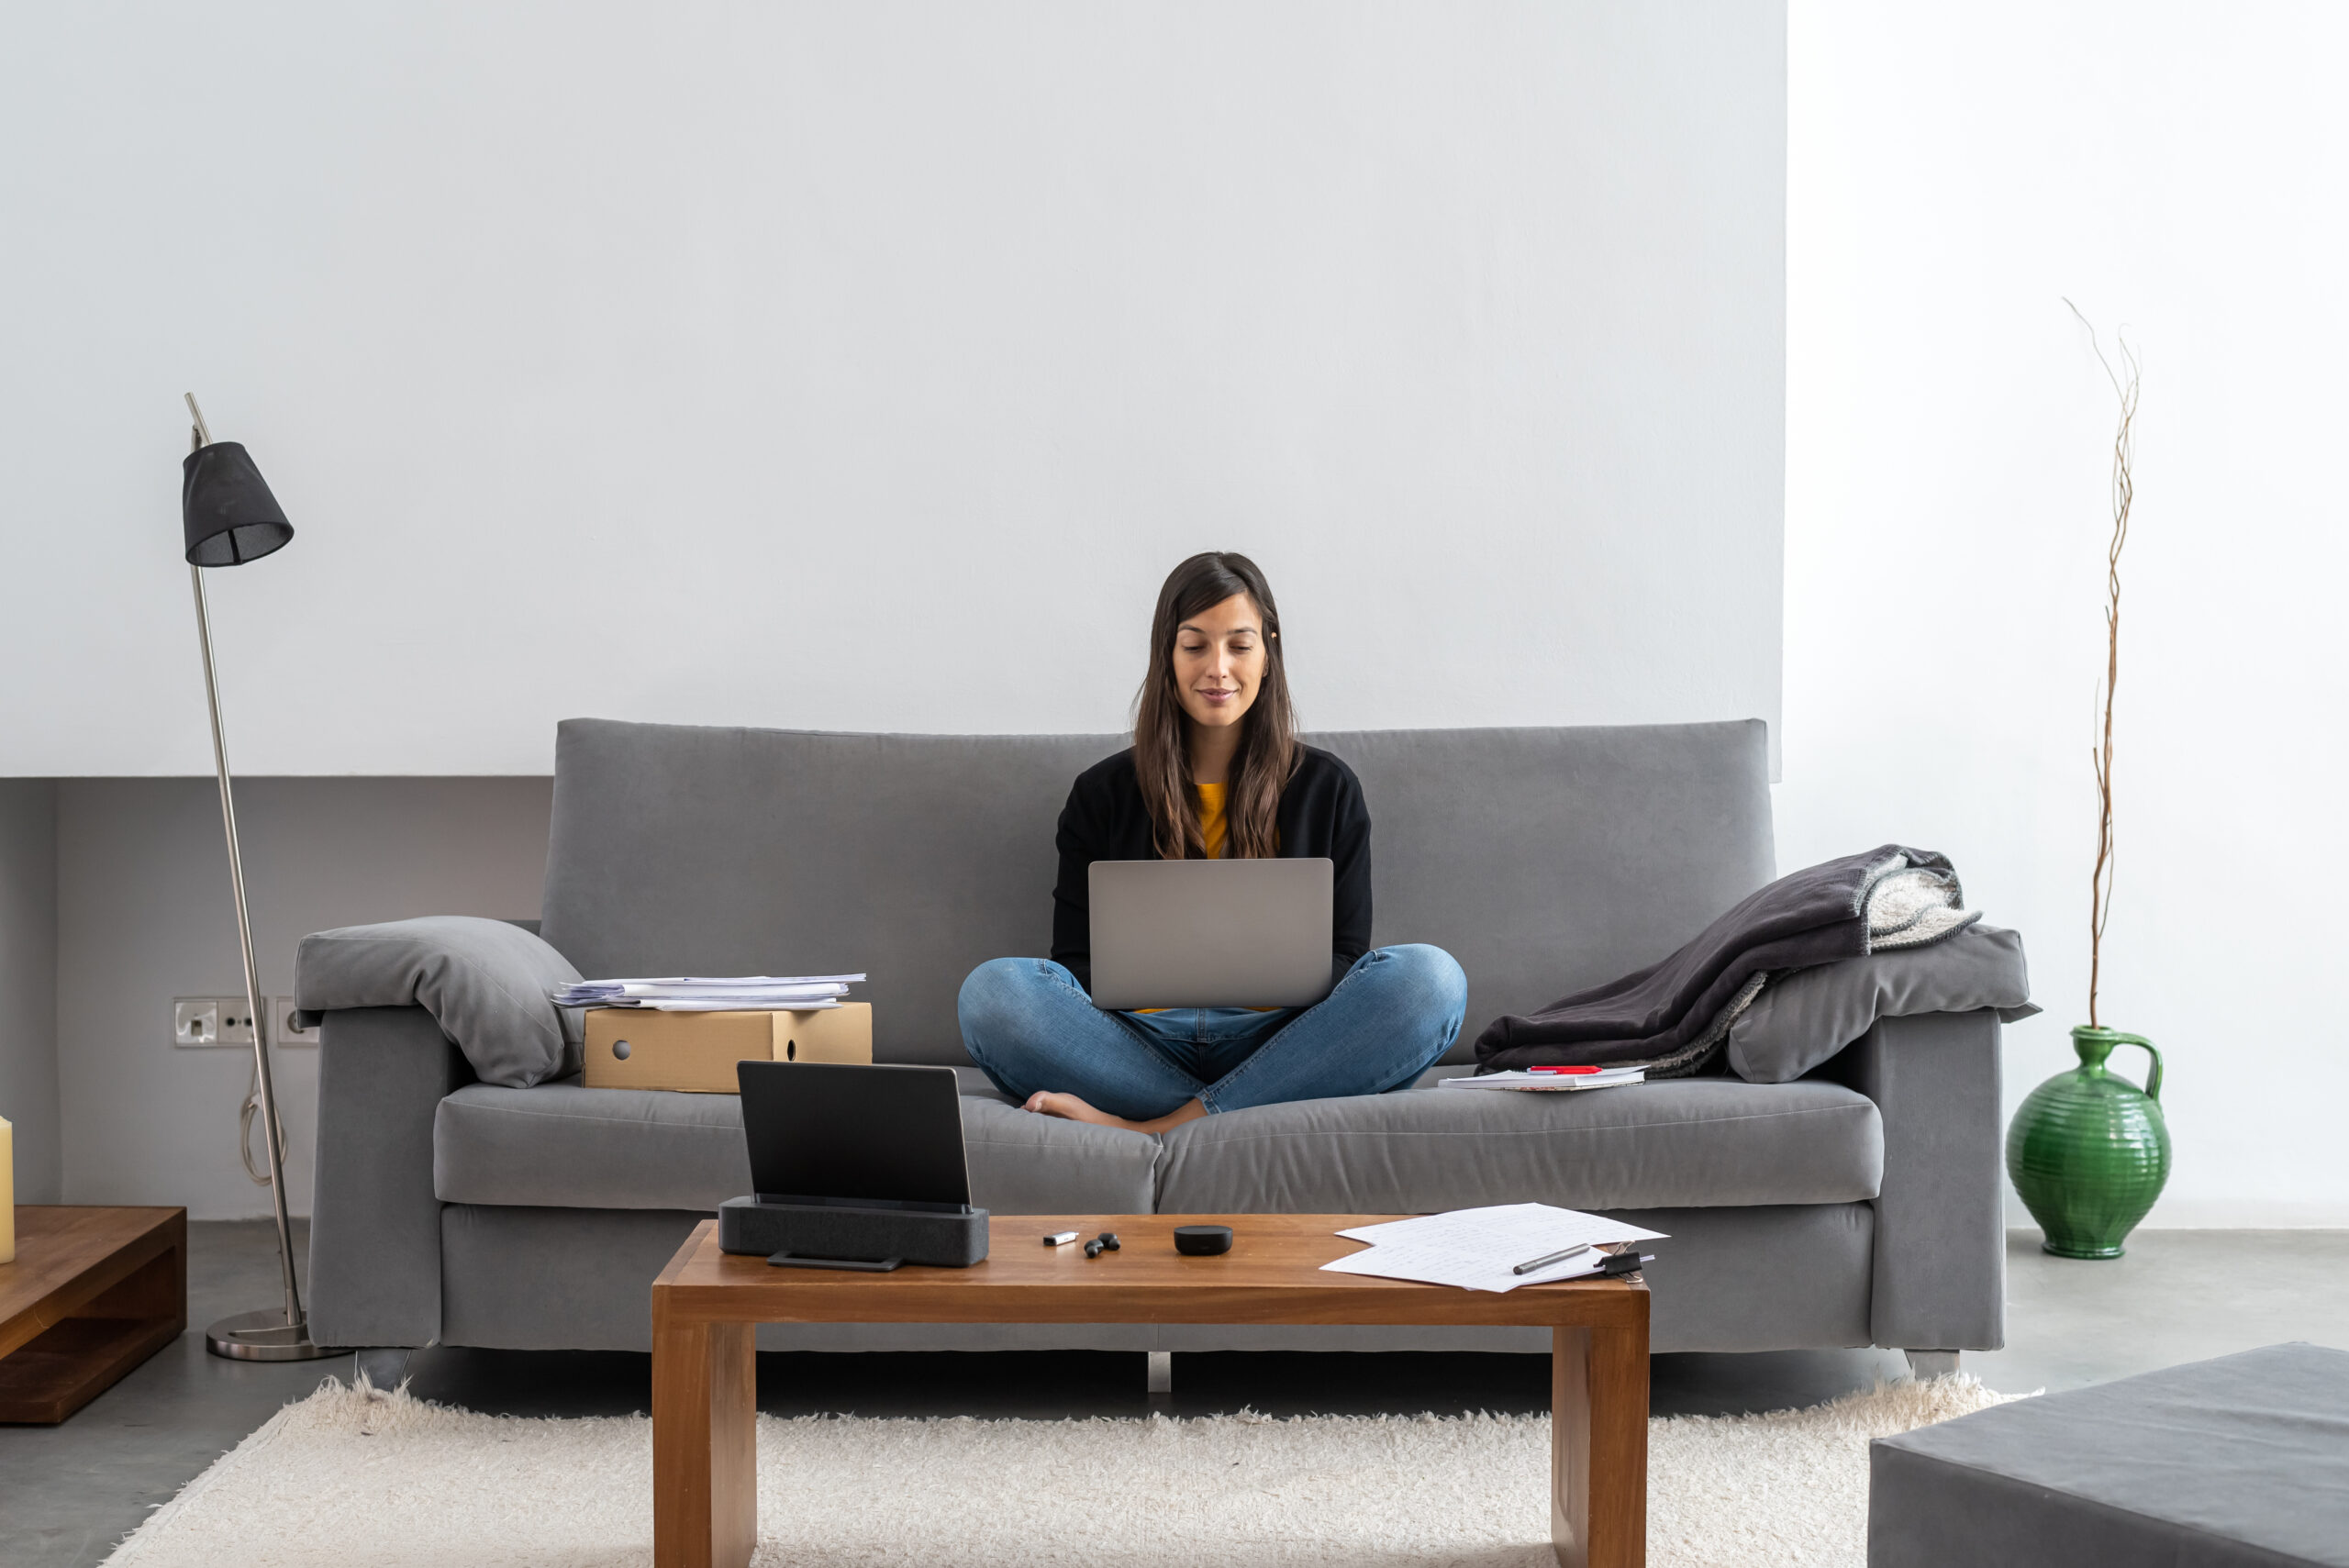 Is work from home the same as work from anywhere?